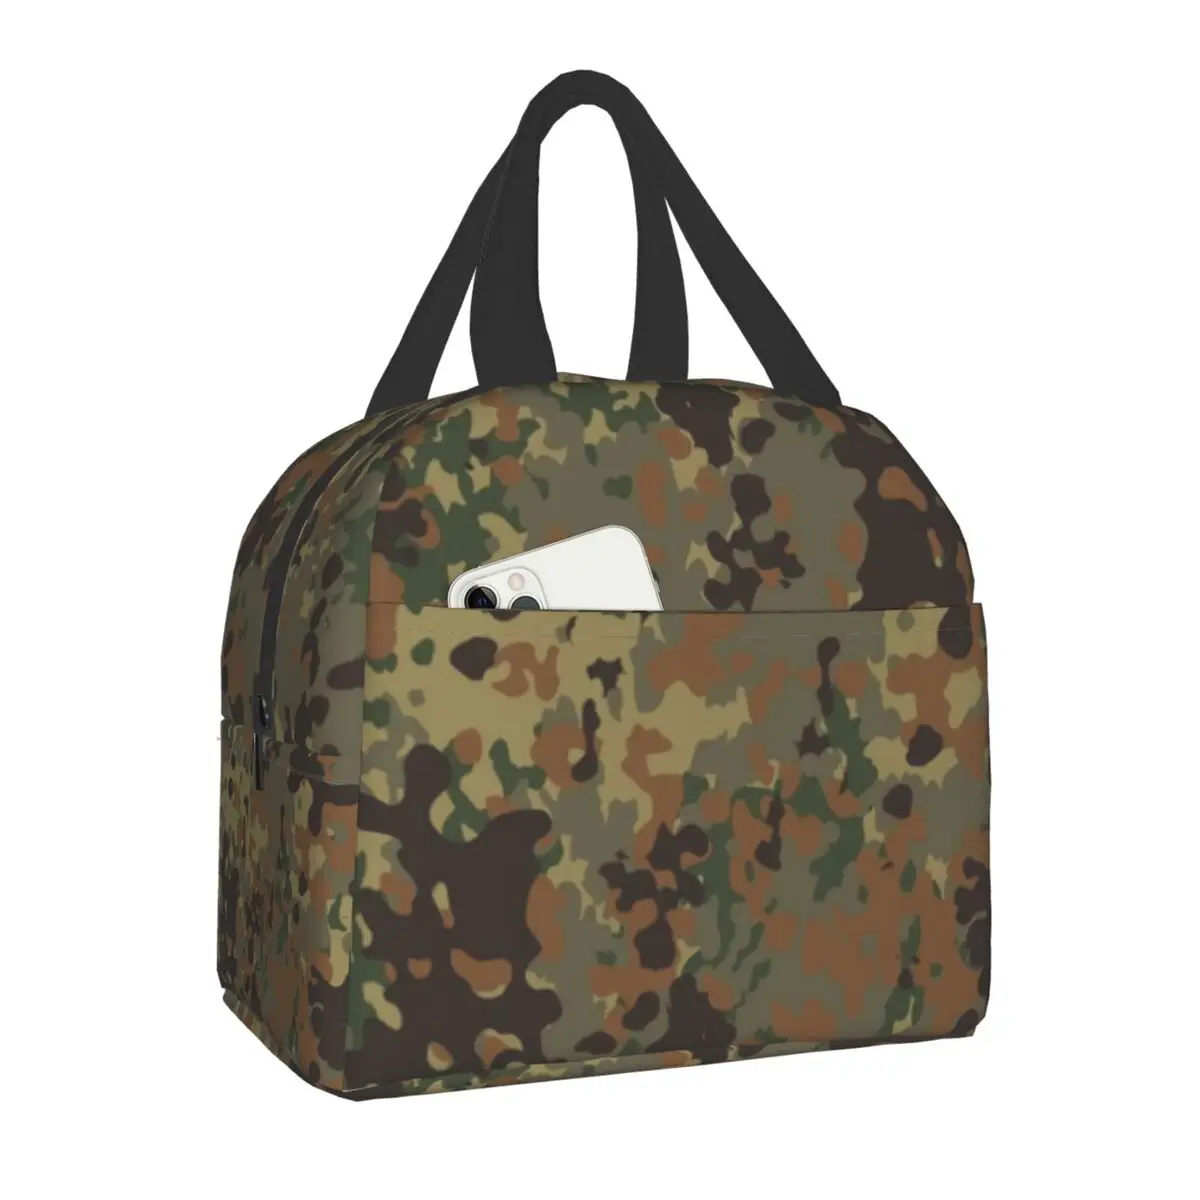 Flecktarn Camo Insulated Lunch Tote Bag for Men Military Army Camouflage Cooler Thermal Food Lunch Box Outdoor Camping Travel